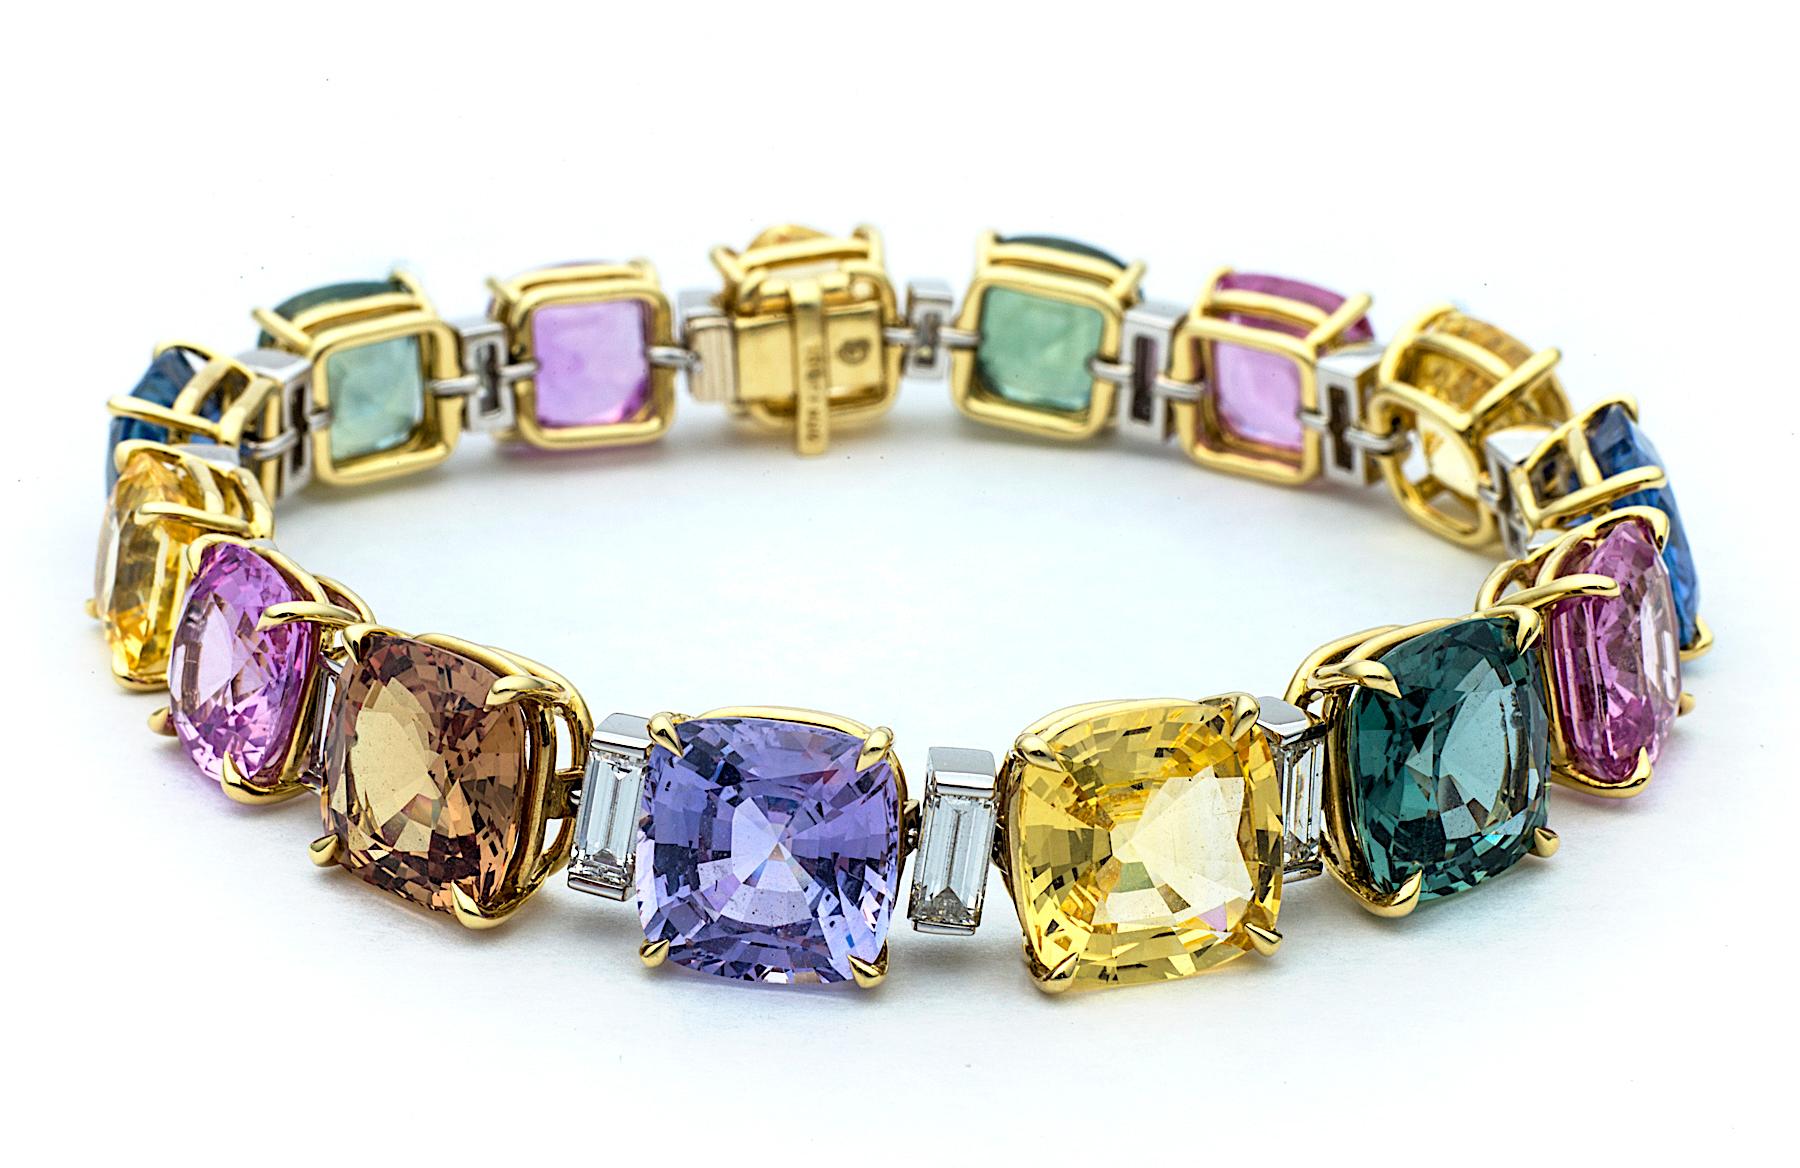 Looking like an irresistible array of gourmet candies, this colored sapphire bracelet is as sweet as it gets!  Consisting of 15 cushion cut sapphires, totaling approximately 59 carats in the heavenly hues of pink, yellow, purple, green, orange, and